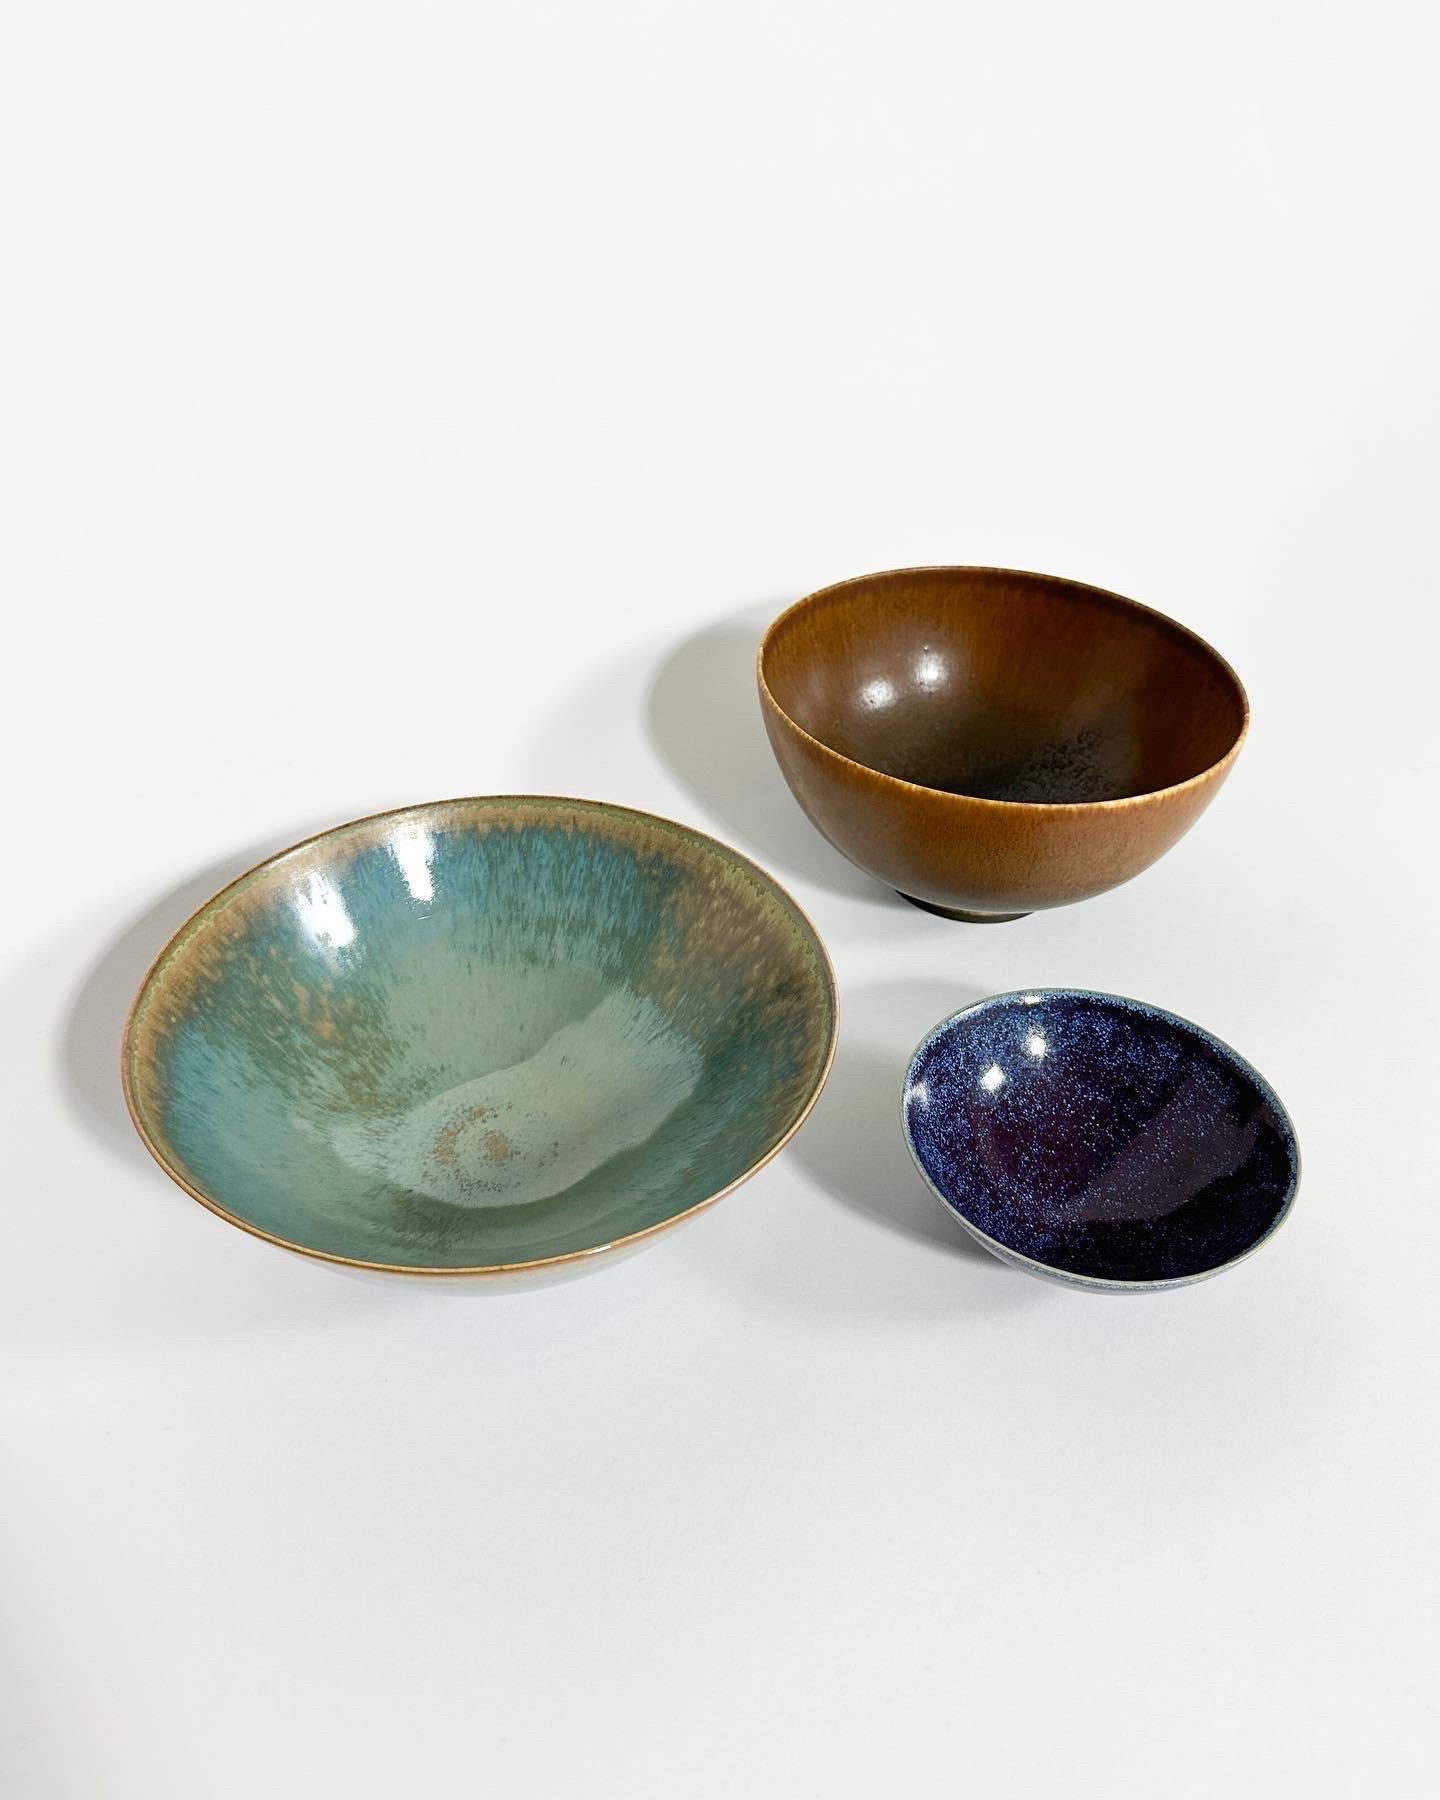 Stoneware bowls by Sven Wejsfelt & Lasse Östman for Gustavsberg in Sweden in the 1980s.

Left to right first photo:

• Lasse Östman acquamarine glossy bowl, d: 17 cm, h: 7 cm, excellent condition

• Sven Wejsfelt small, dark purple & blue bowl, d: